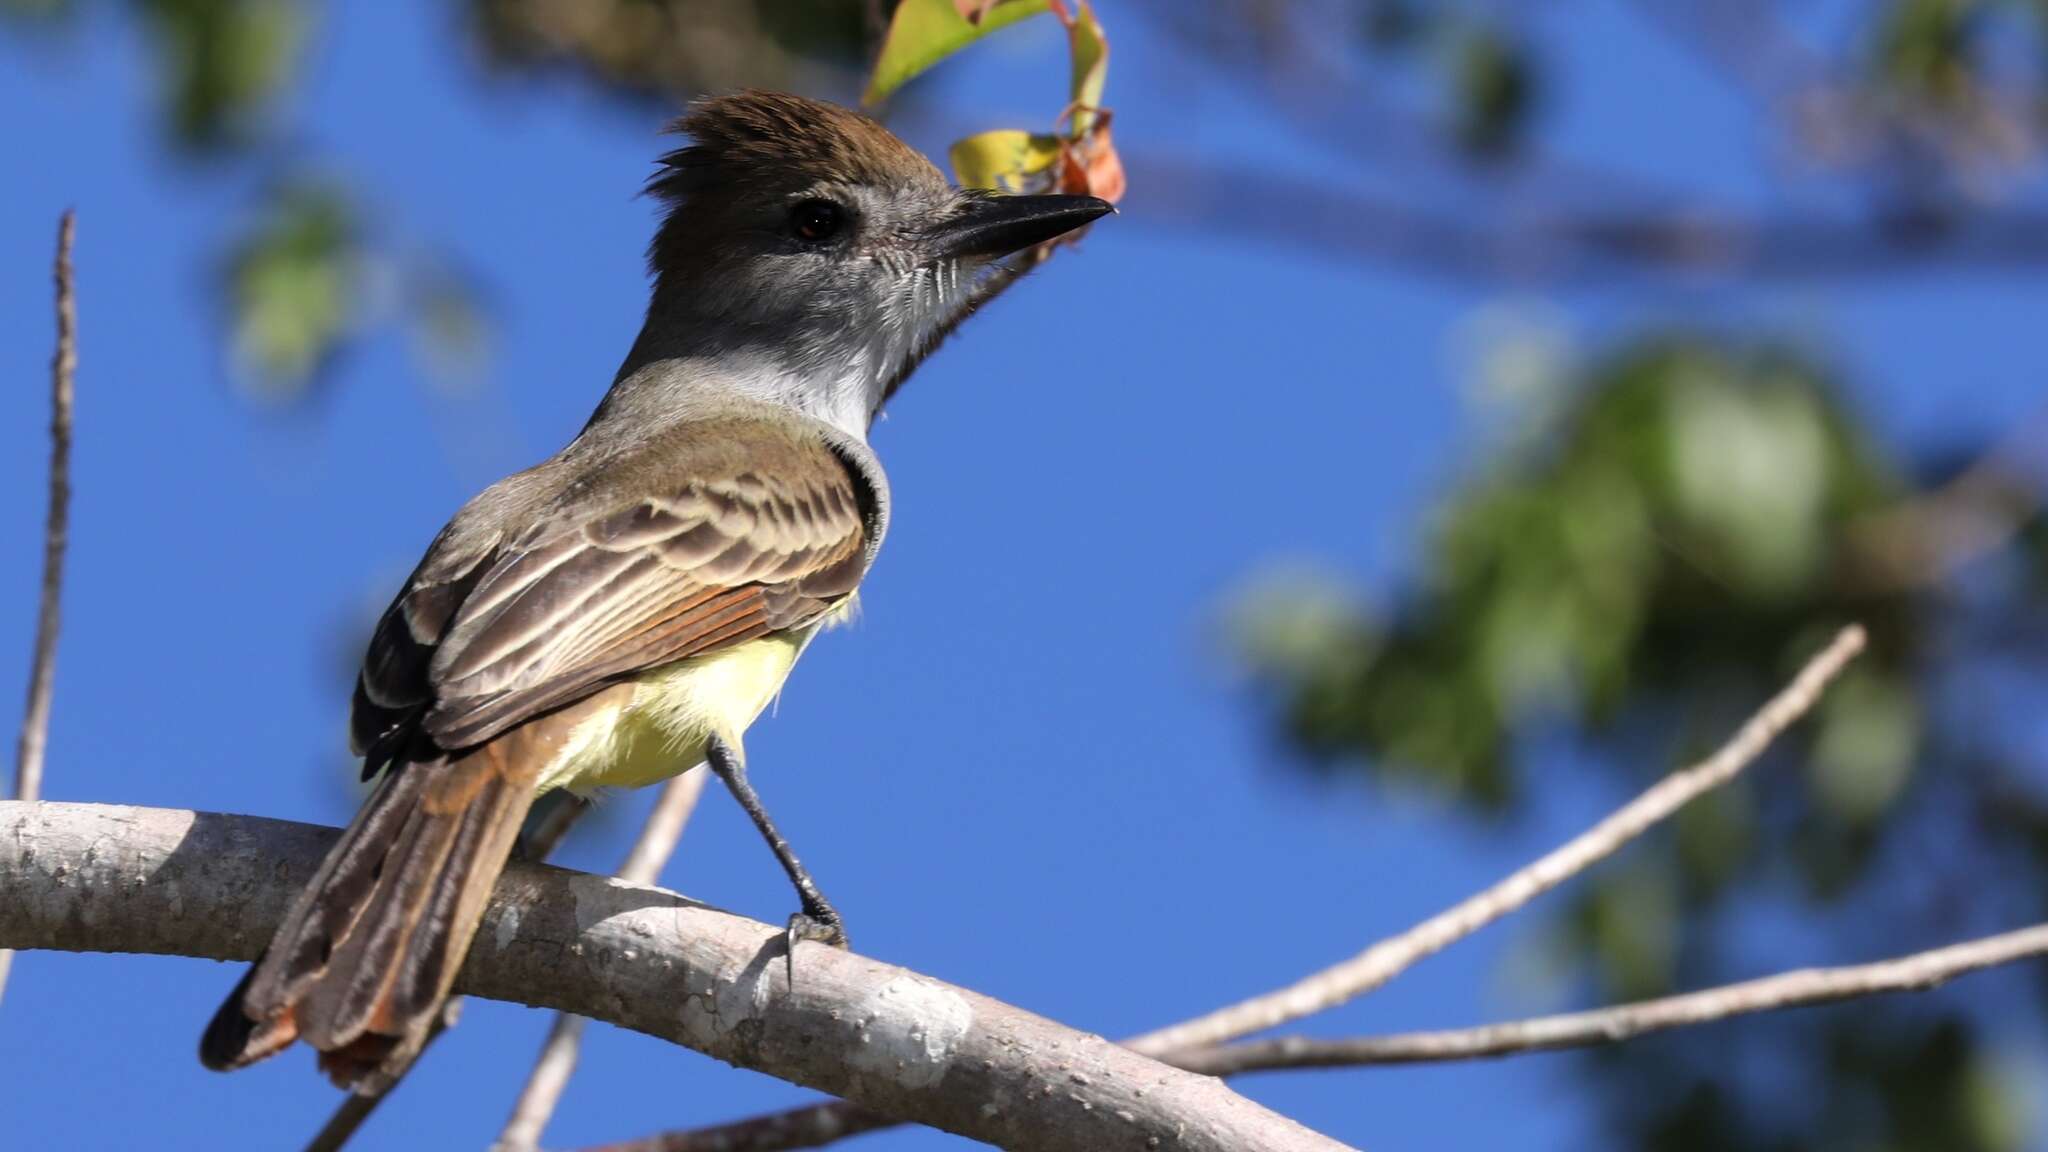 Image of Brown-crested Flycatcher